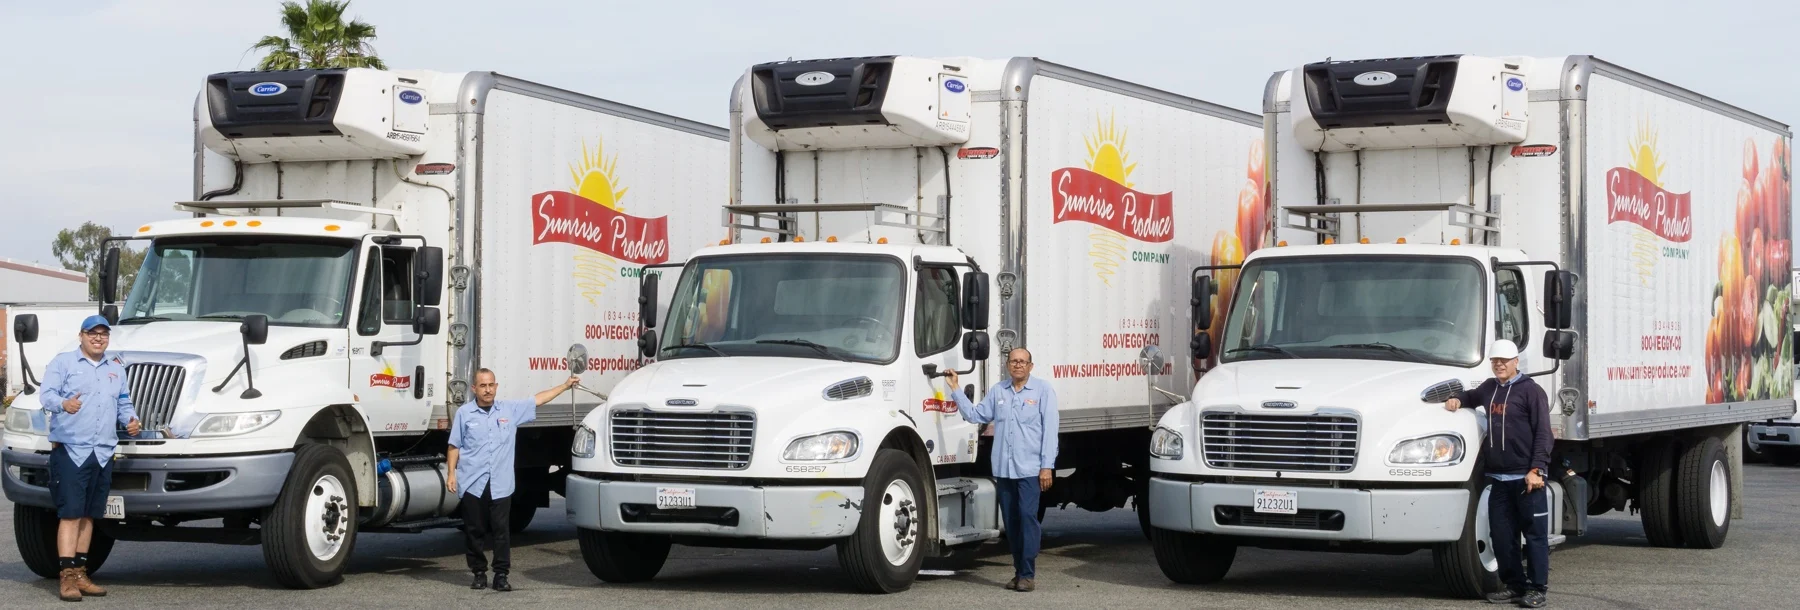 Sunrise Produce saves $50,000 in fuel cost with real-time visibility